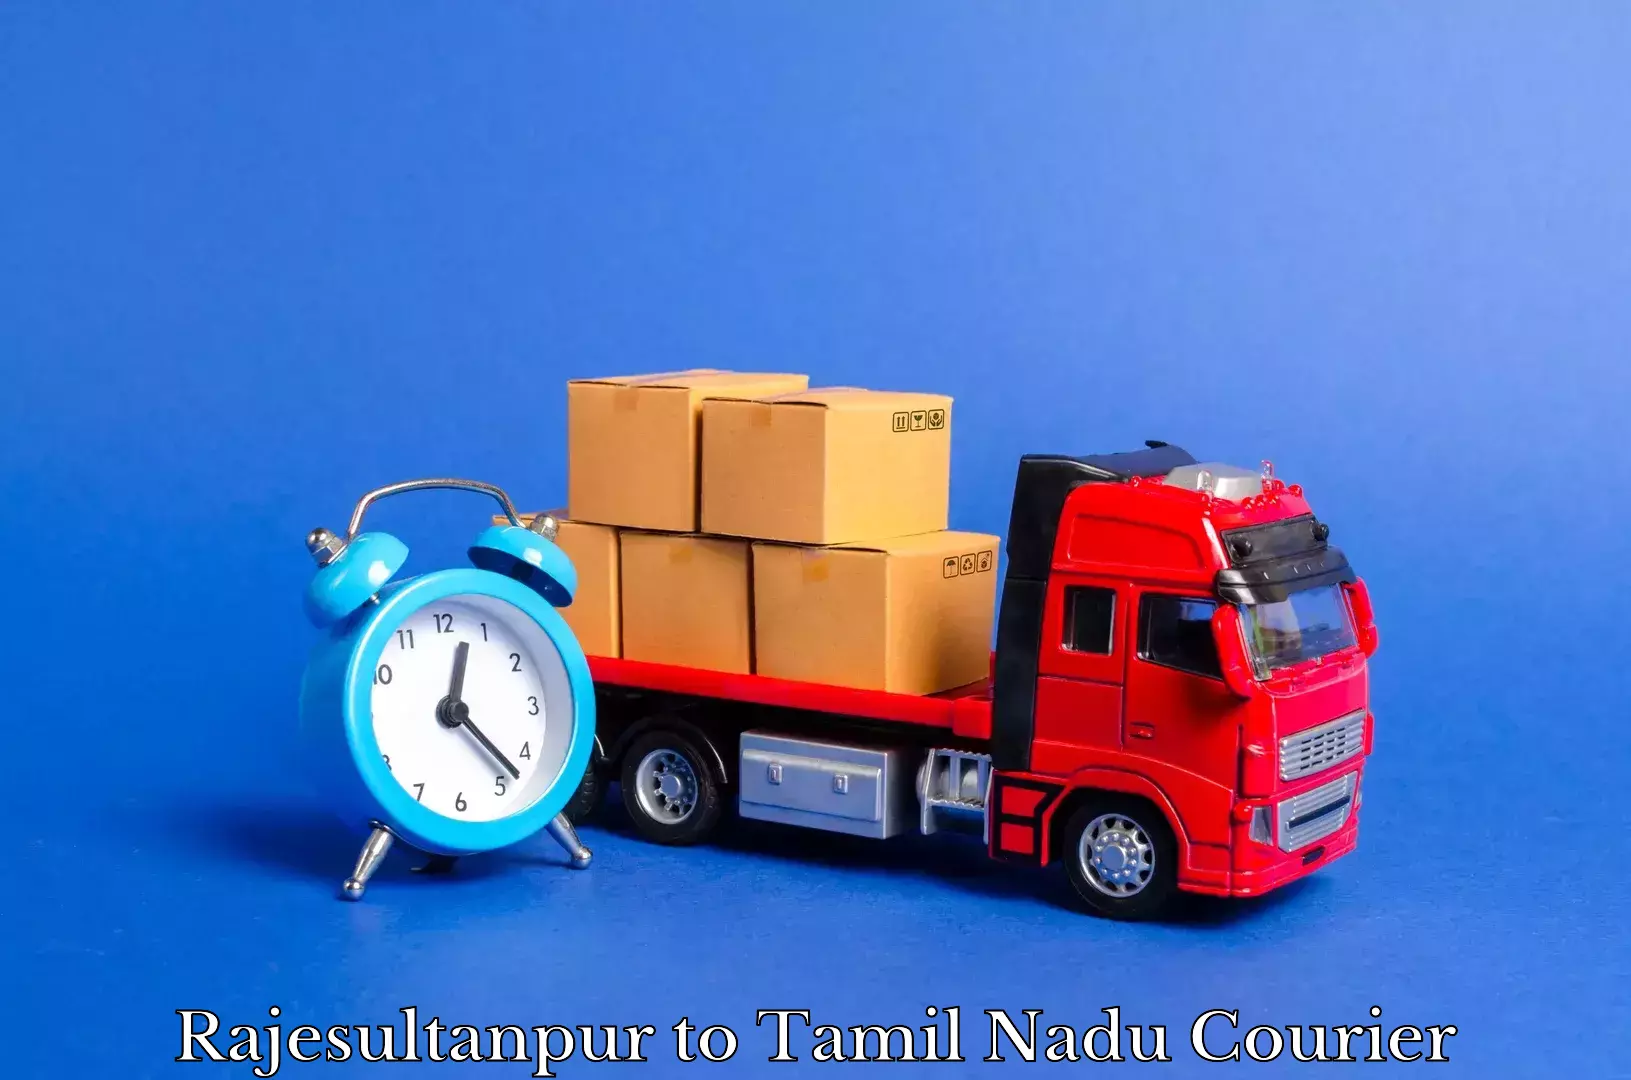 Home relocation and storage Rajesultanpur to Tamil Nadu